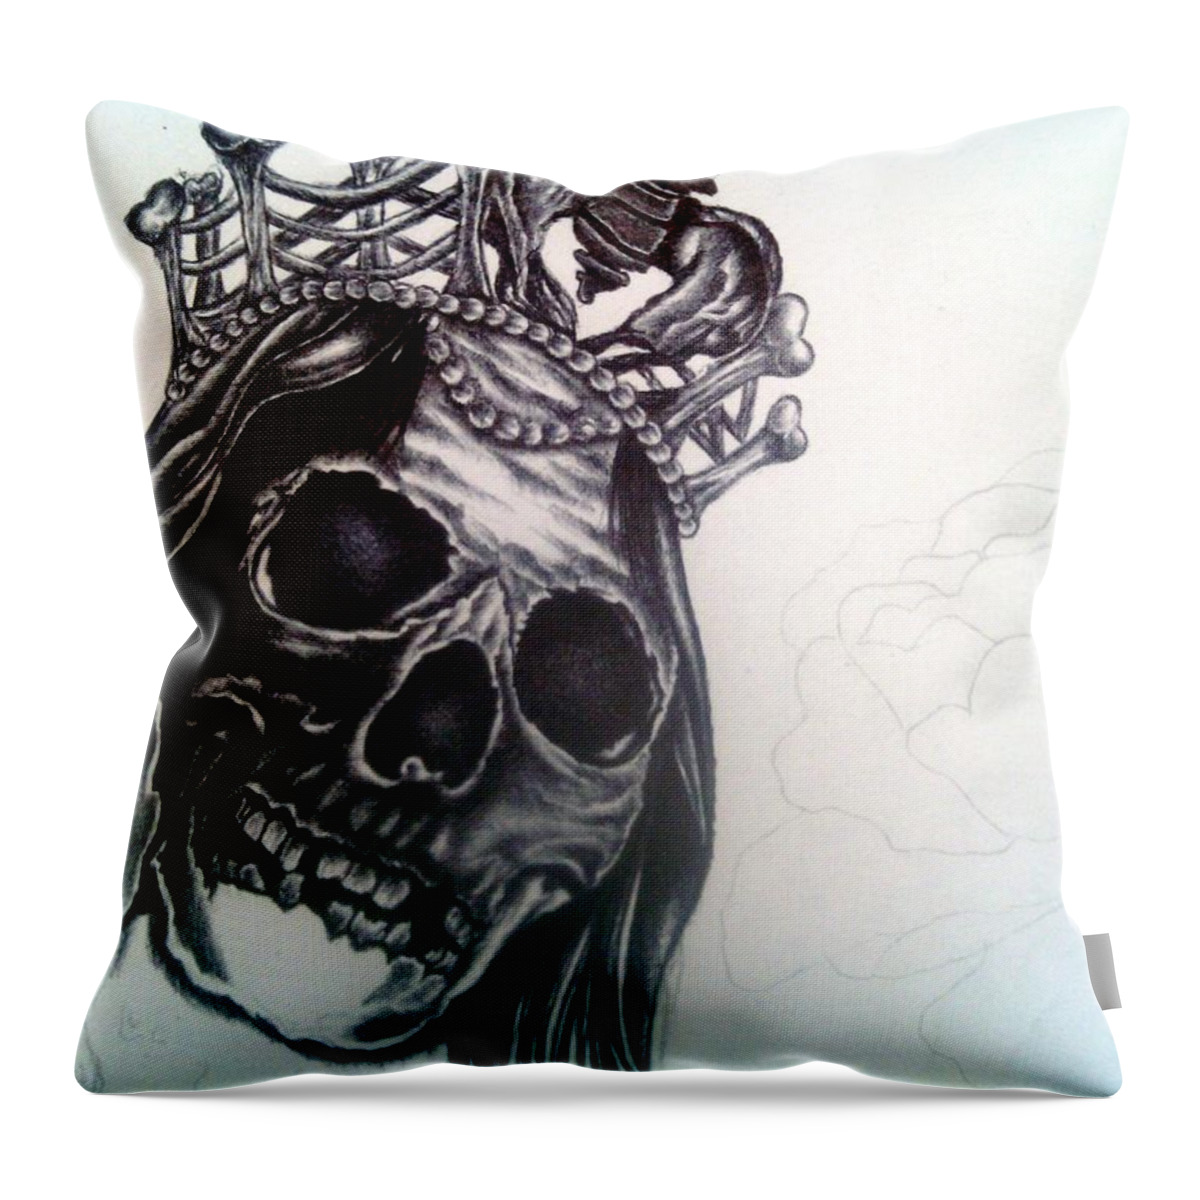 Prison Art Throw Pillow featuring the drawing Untitled #1 by Porky 